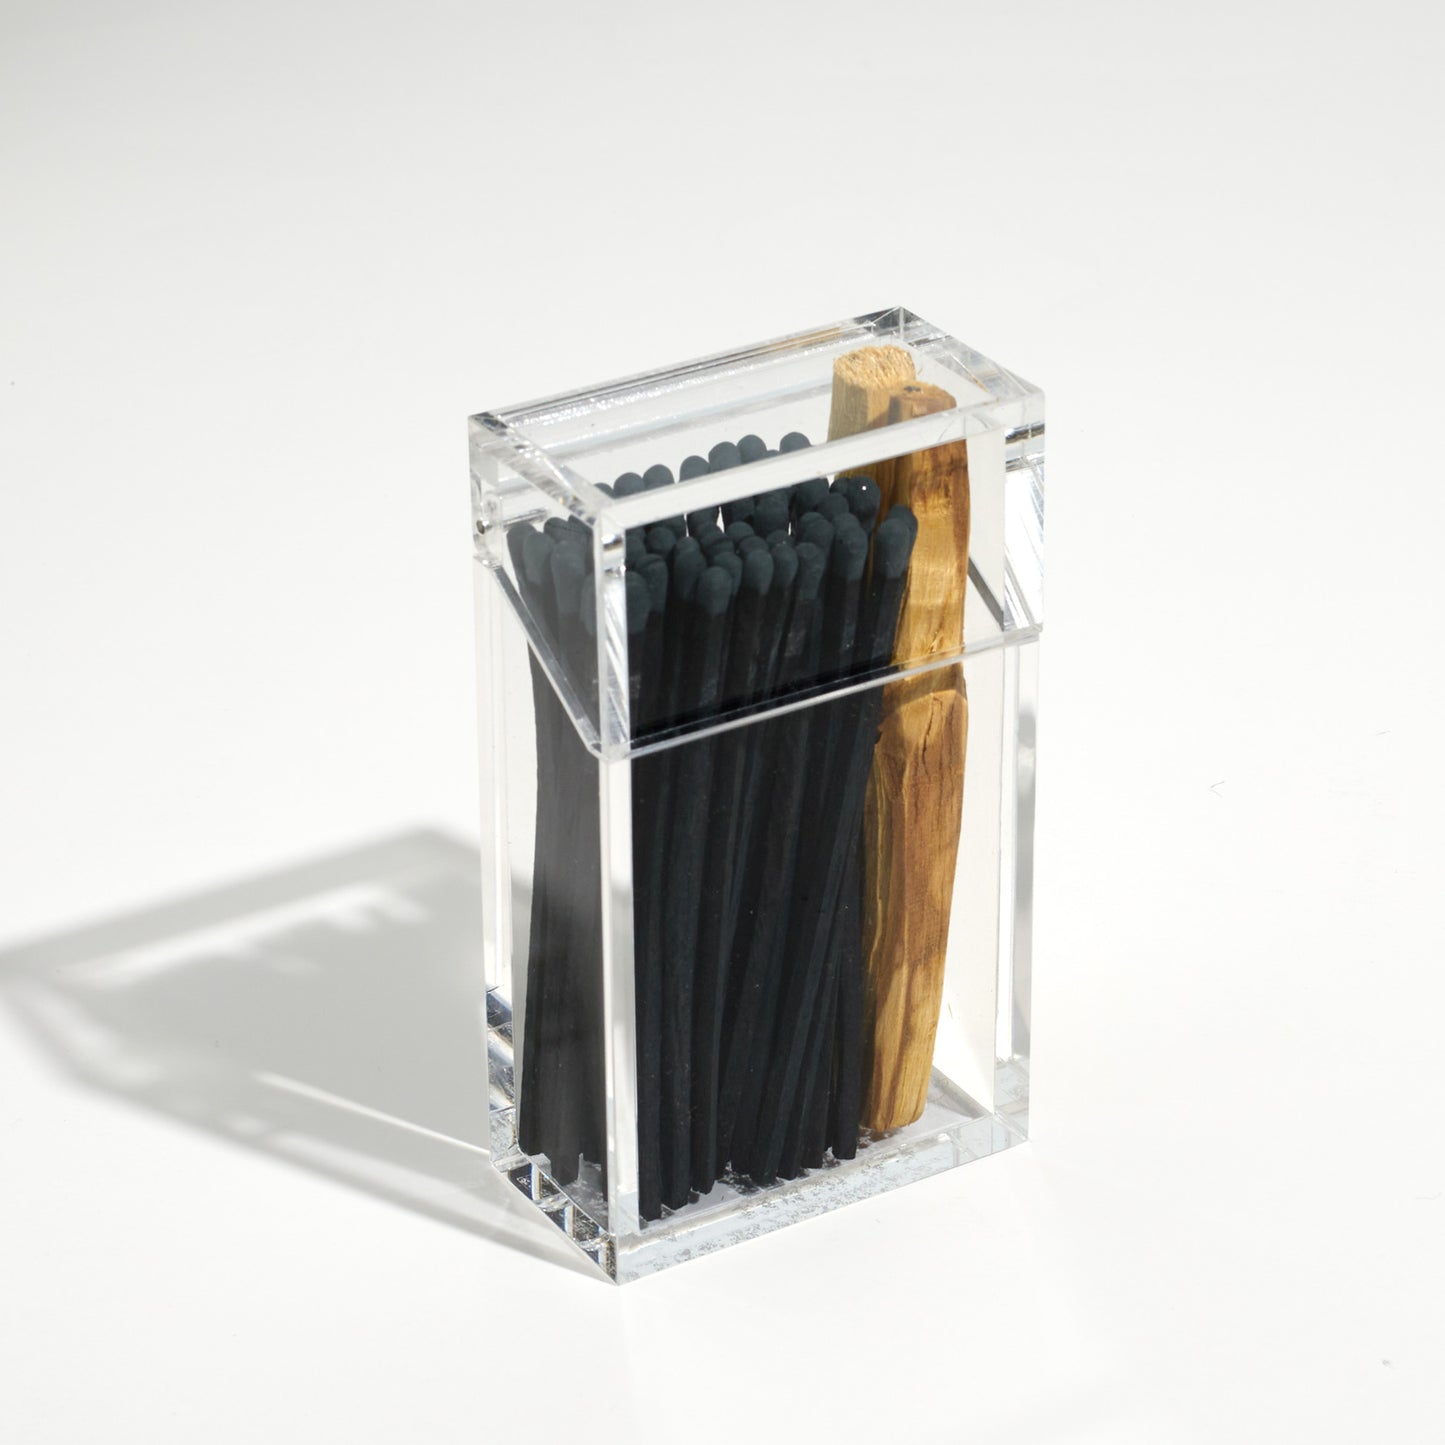 Closed Cigarette style acrylic case with Black matches and palo santo in it. 